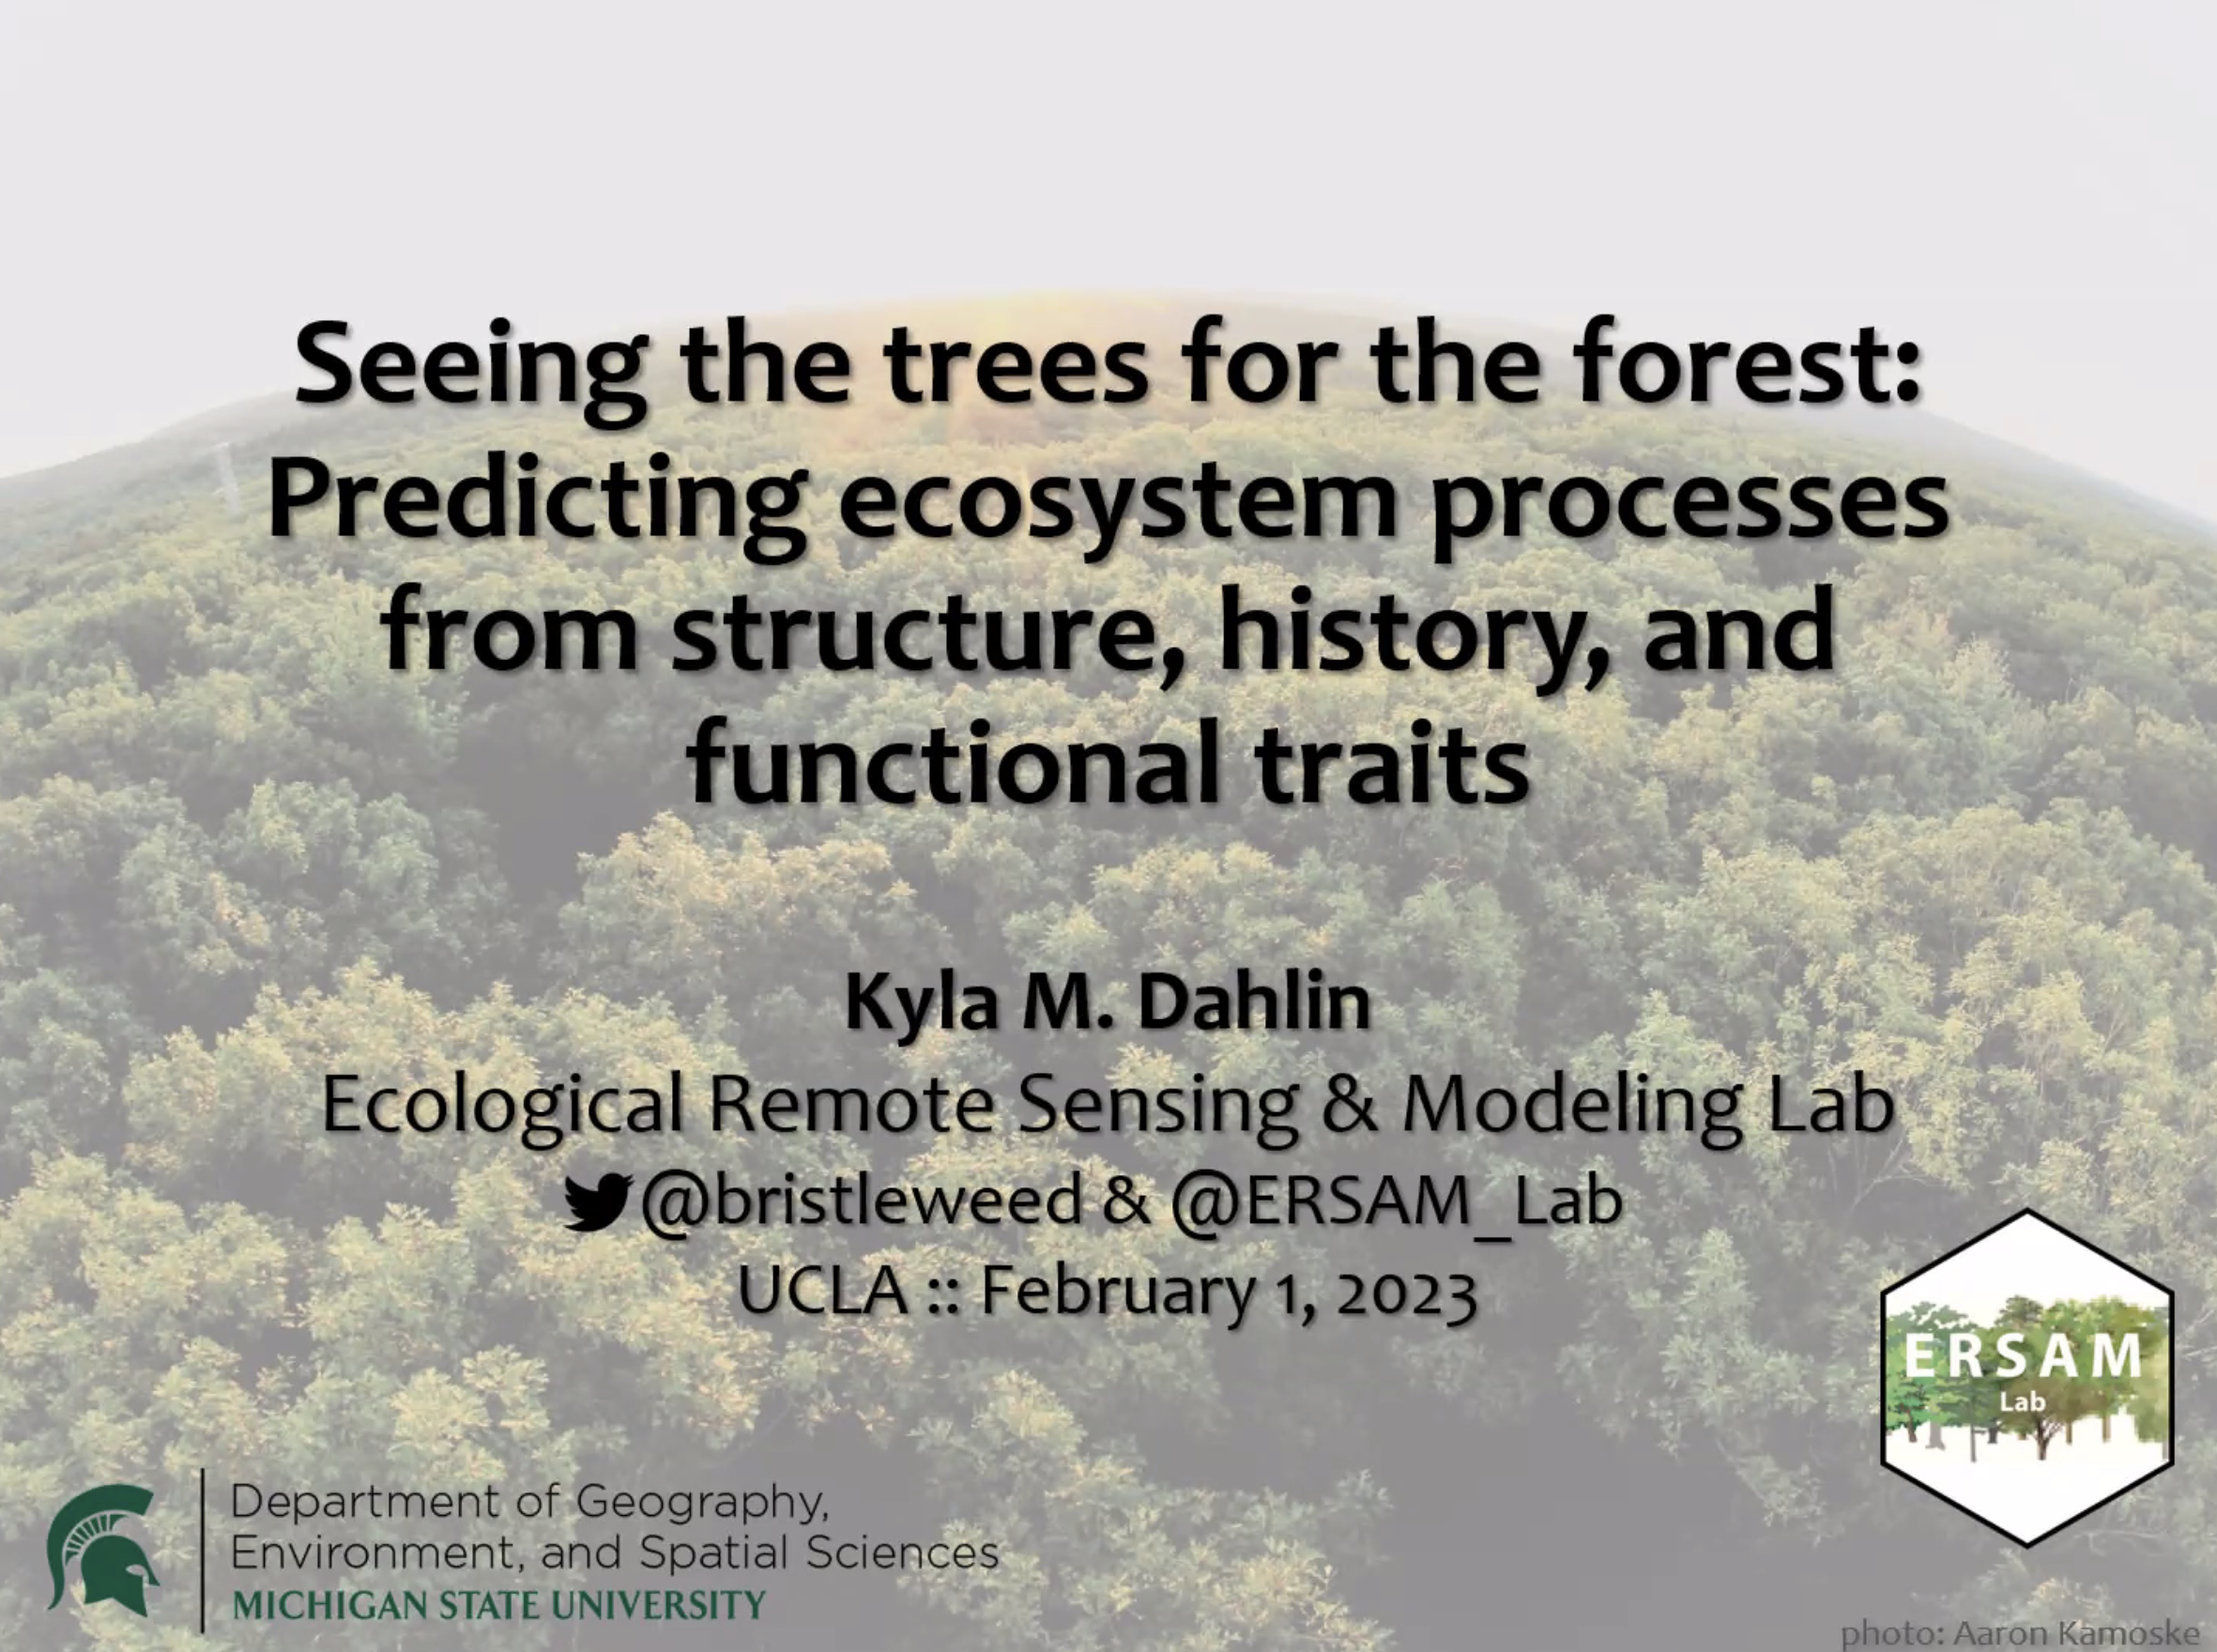 Predicting ecosystem processes from structure, history, and functional traits